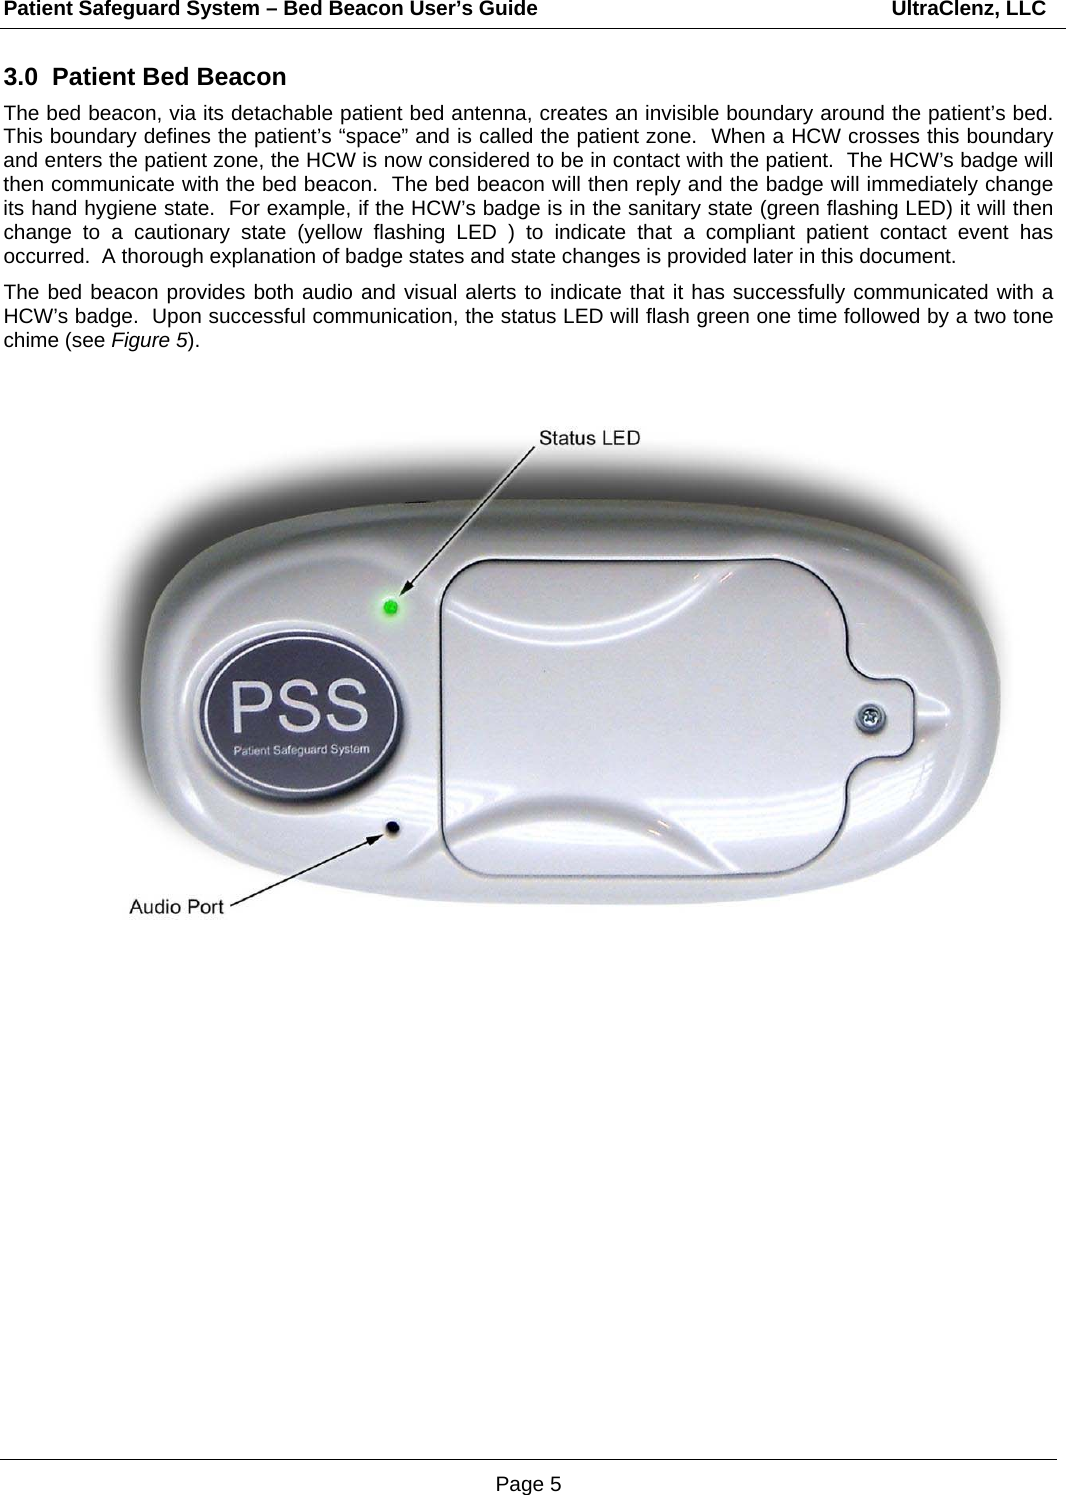 Patient Safeguard System – Bed Beacon User’s Guide                                                             UltraClenz, LLC Page 5 3.0  Patient Bed Beacon The bed beacon, via its detachable patient bed antenna, creates an invisible boundary around the patient’s bed.  This boundary defines the patient’s “space” and is called the patient zone.  When a HCW crosses this boundary and enters the patient zone, the HCW is now considered to be in contact with the patient.  The HCW’s badge will then communicate with the bed beacon.  The bed beacon will then reply and the badge will immediately change its hand hygiene state.  For example, if the HCW’s badge is in the sanitary state (green flashing LED) it will then change to a cautionary state (yellow flashing LED ) to indicate that a compliant patient contact event has occurred.  A thorough explanation of badge states and state changes is provided later in this document.   The bed beacon provides both audio and visual alerts to indicate that it has successfully communicated with a HCW’s badge.  Upon successful communication, the status LED will flash green one time followed by a two tone chime (see Figure 5).                                           